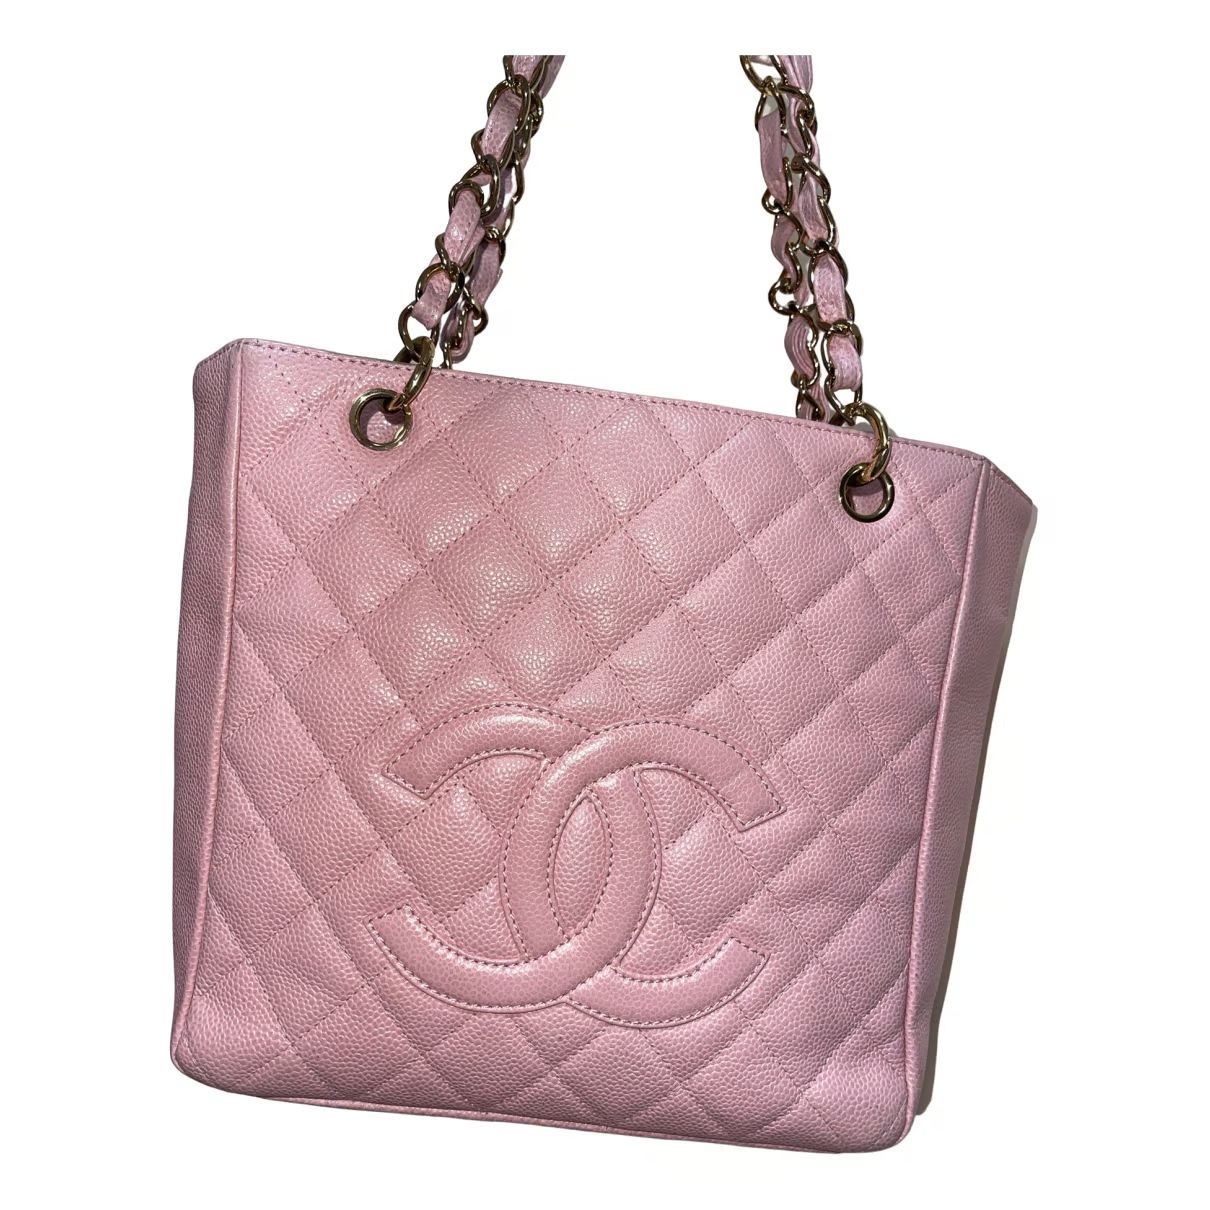 Chanel Petite Shopping Tote leather tote | Vestiaire Collective (Global)